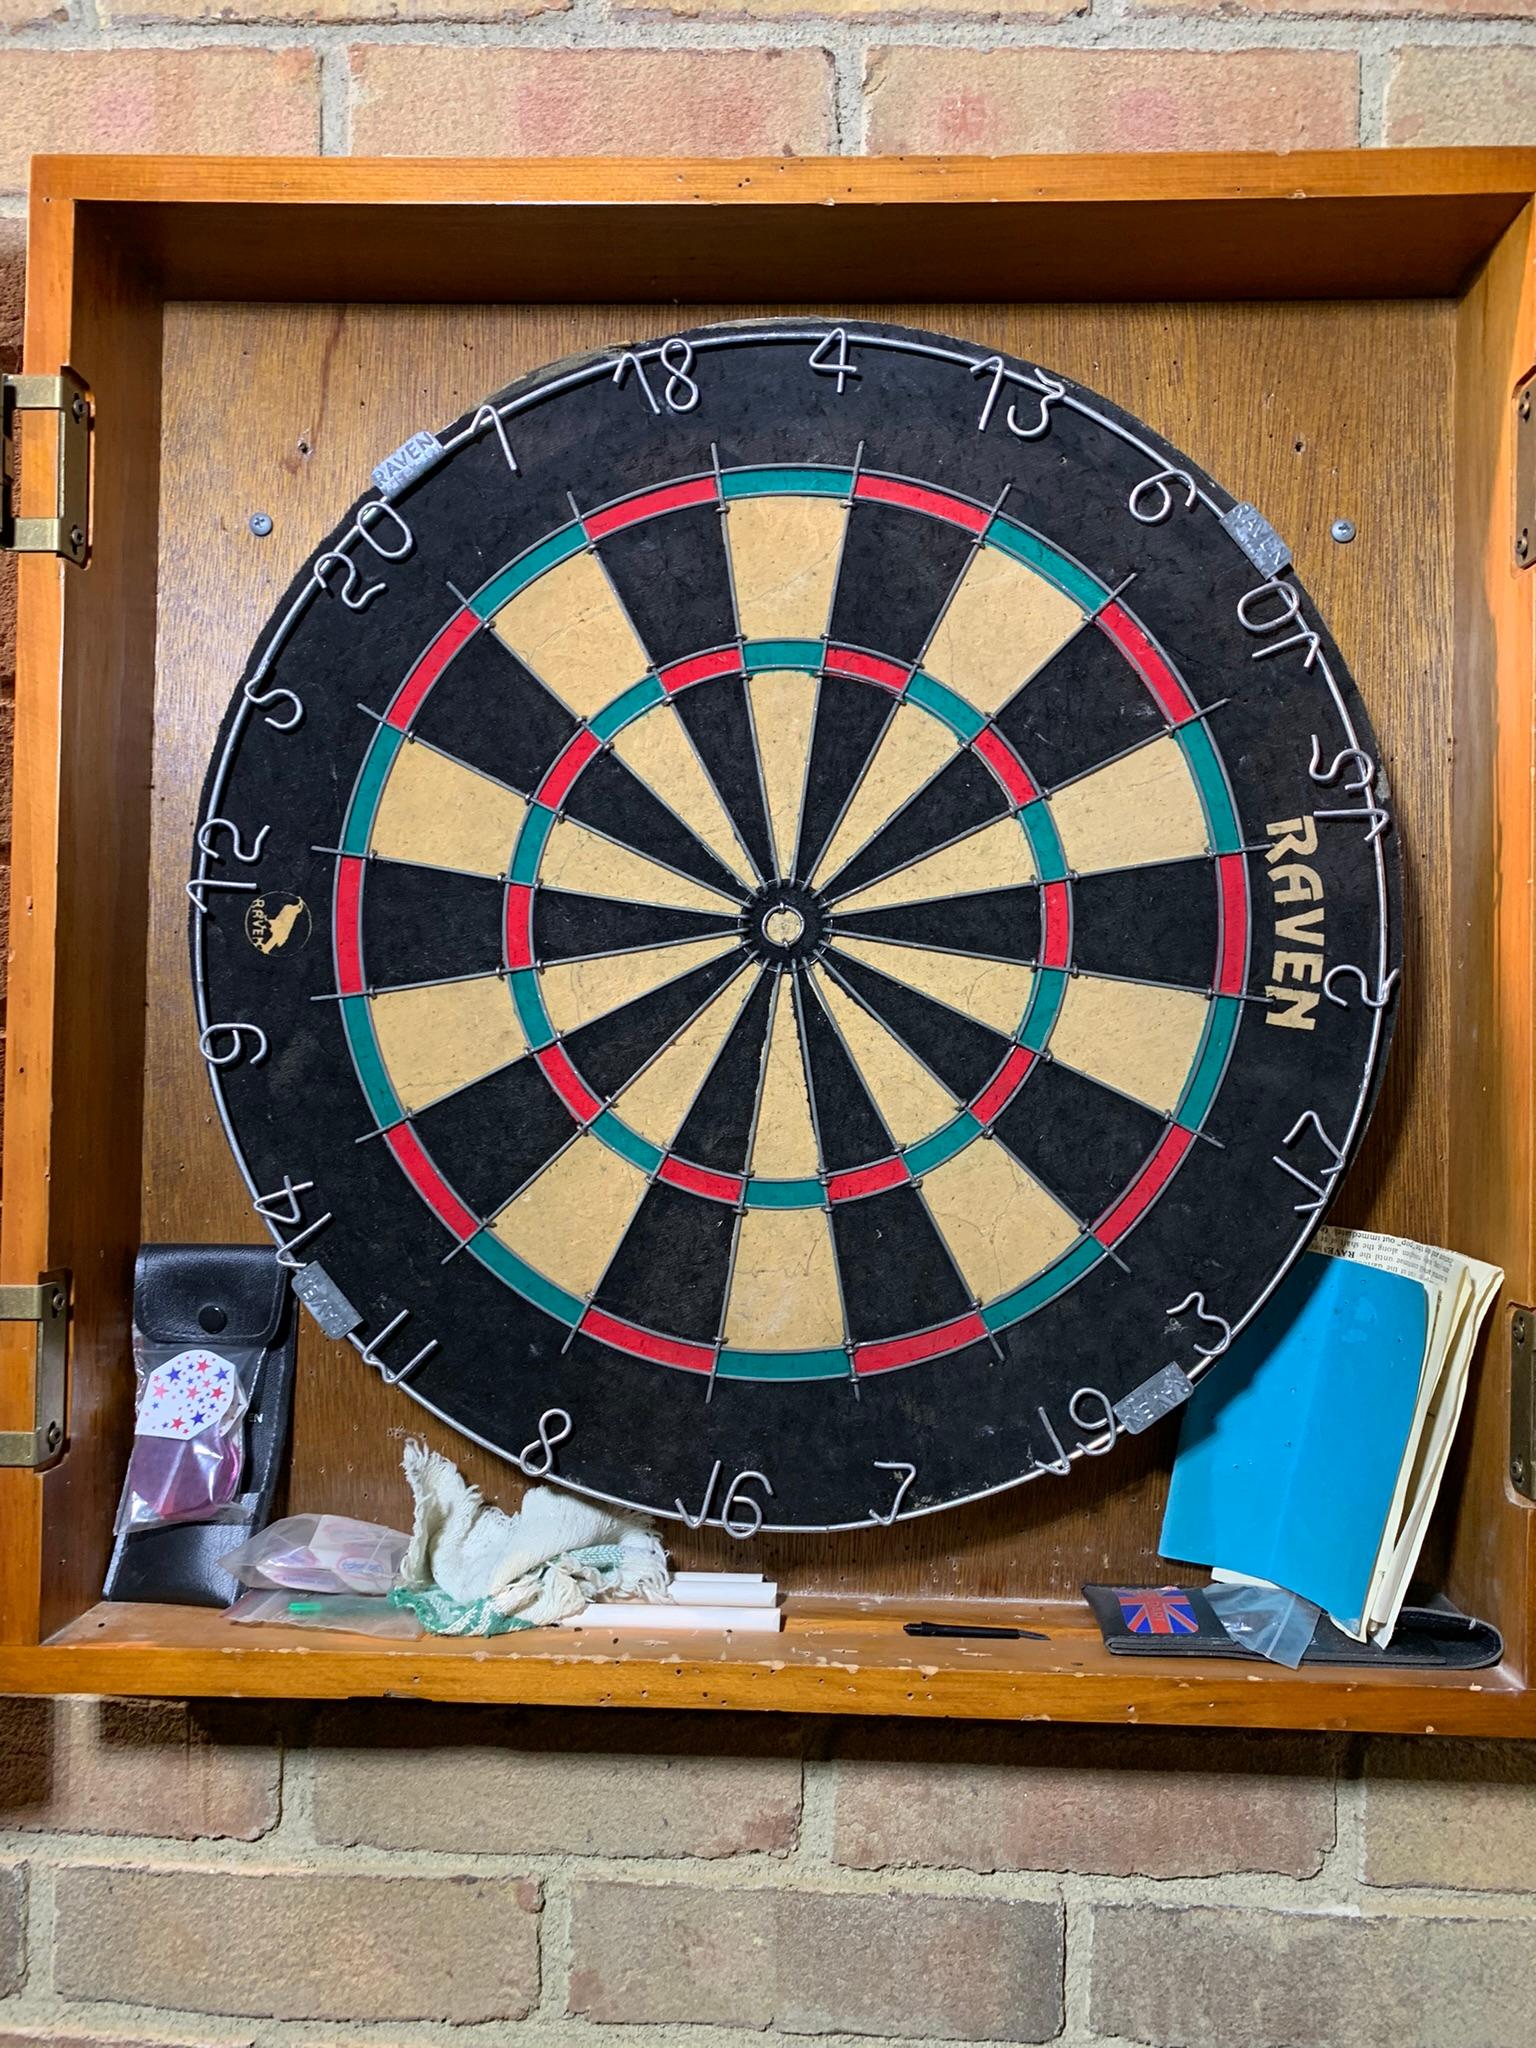 Canadian Made Dart Board with Accessories